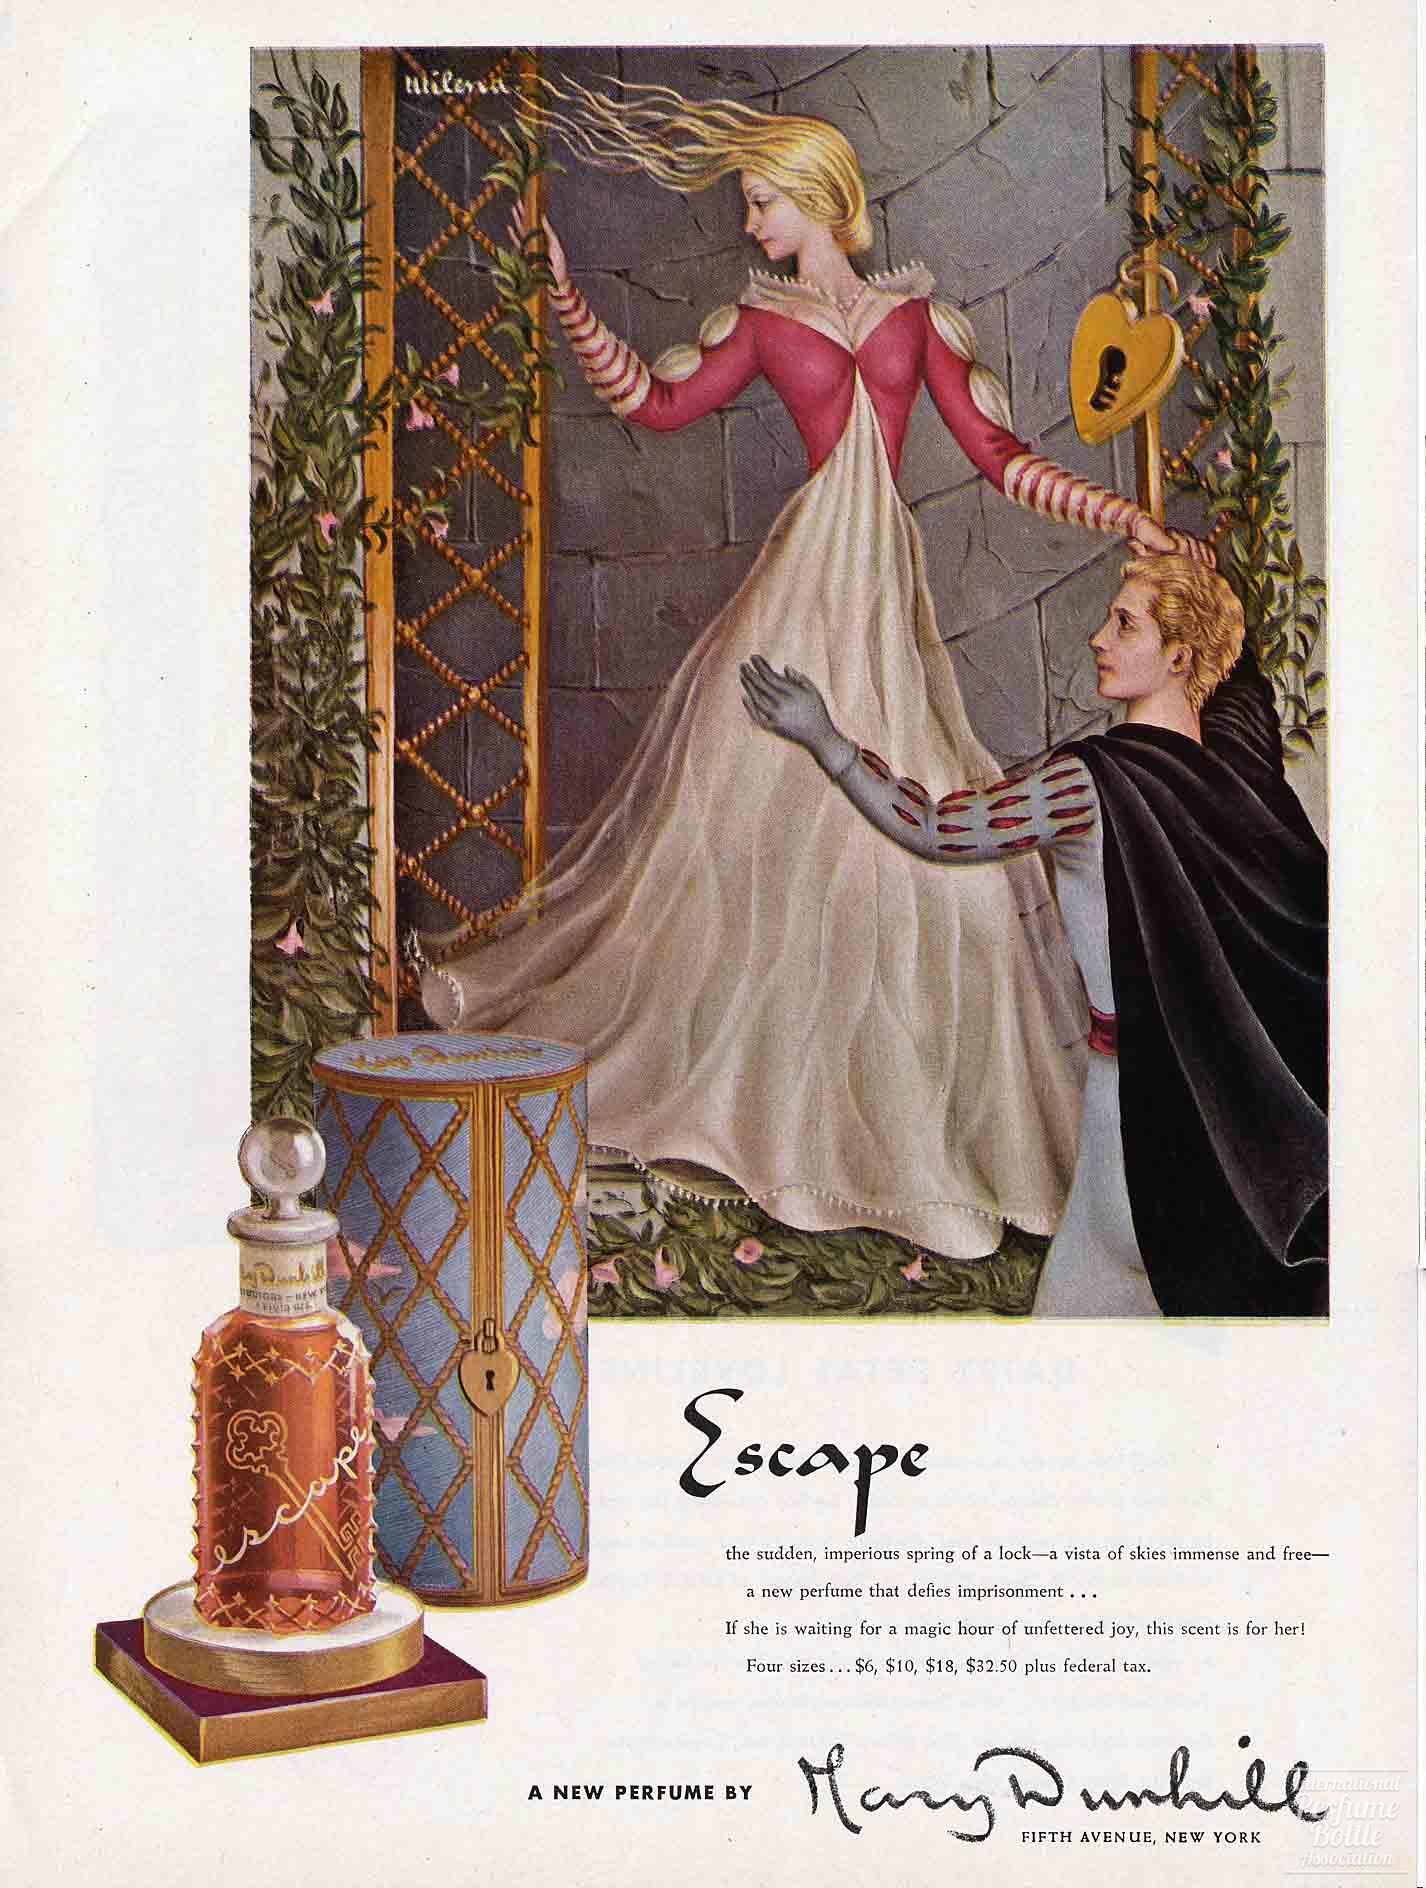 "Escape" by Mary Dunhill Advertisement - 1943